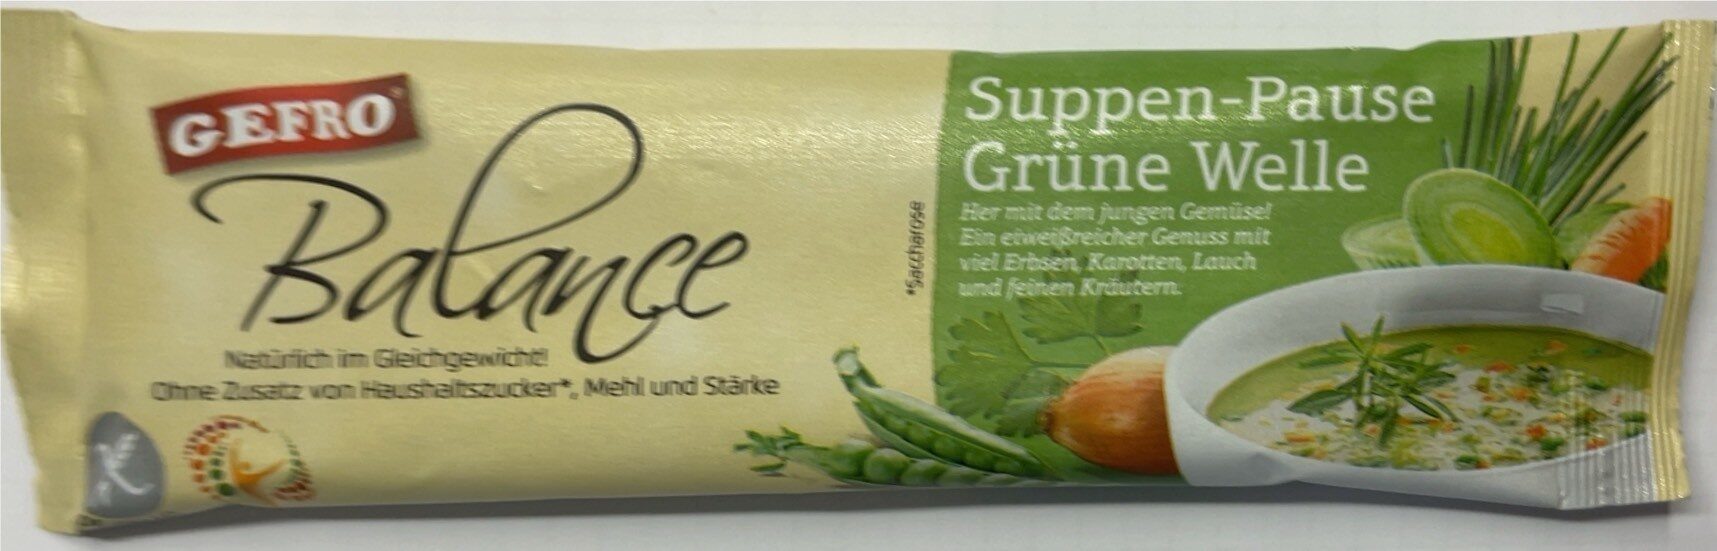 Suppen-Pause Grüne Welle - Product - fr